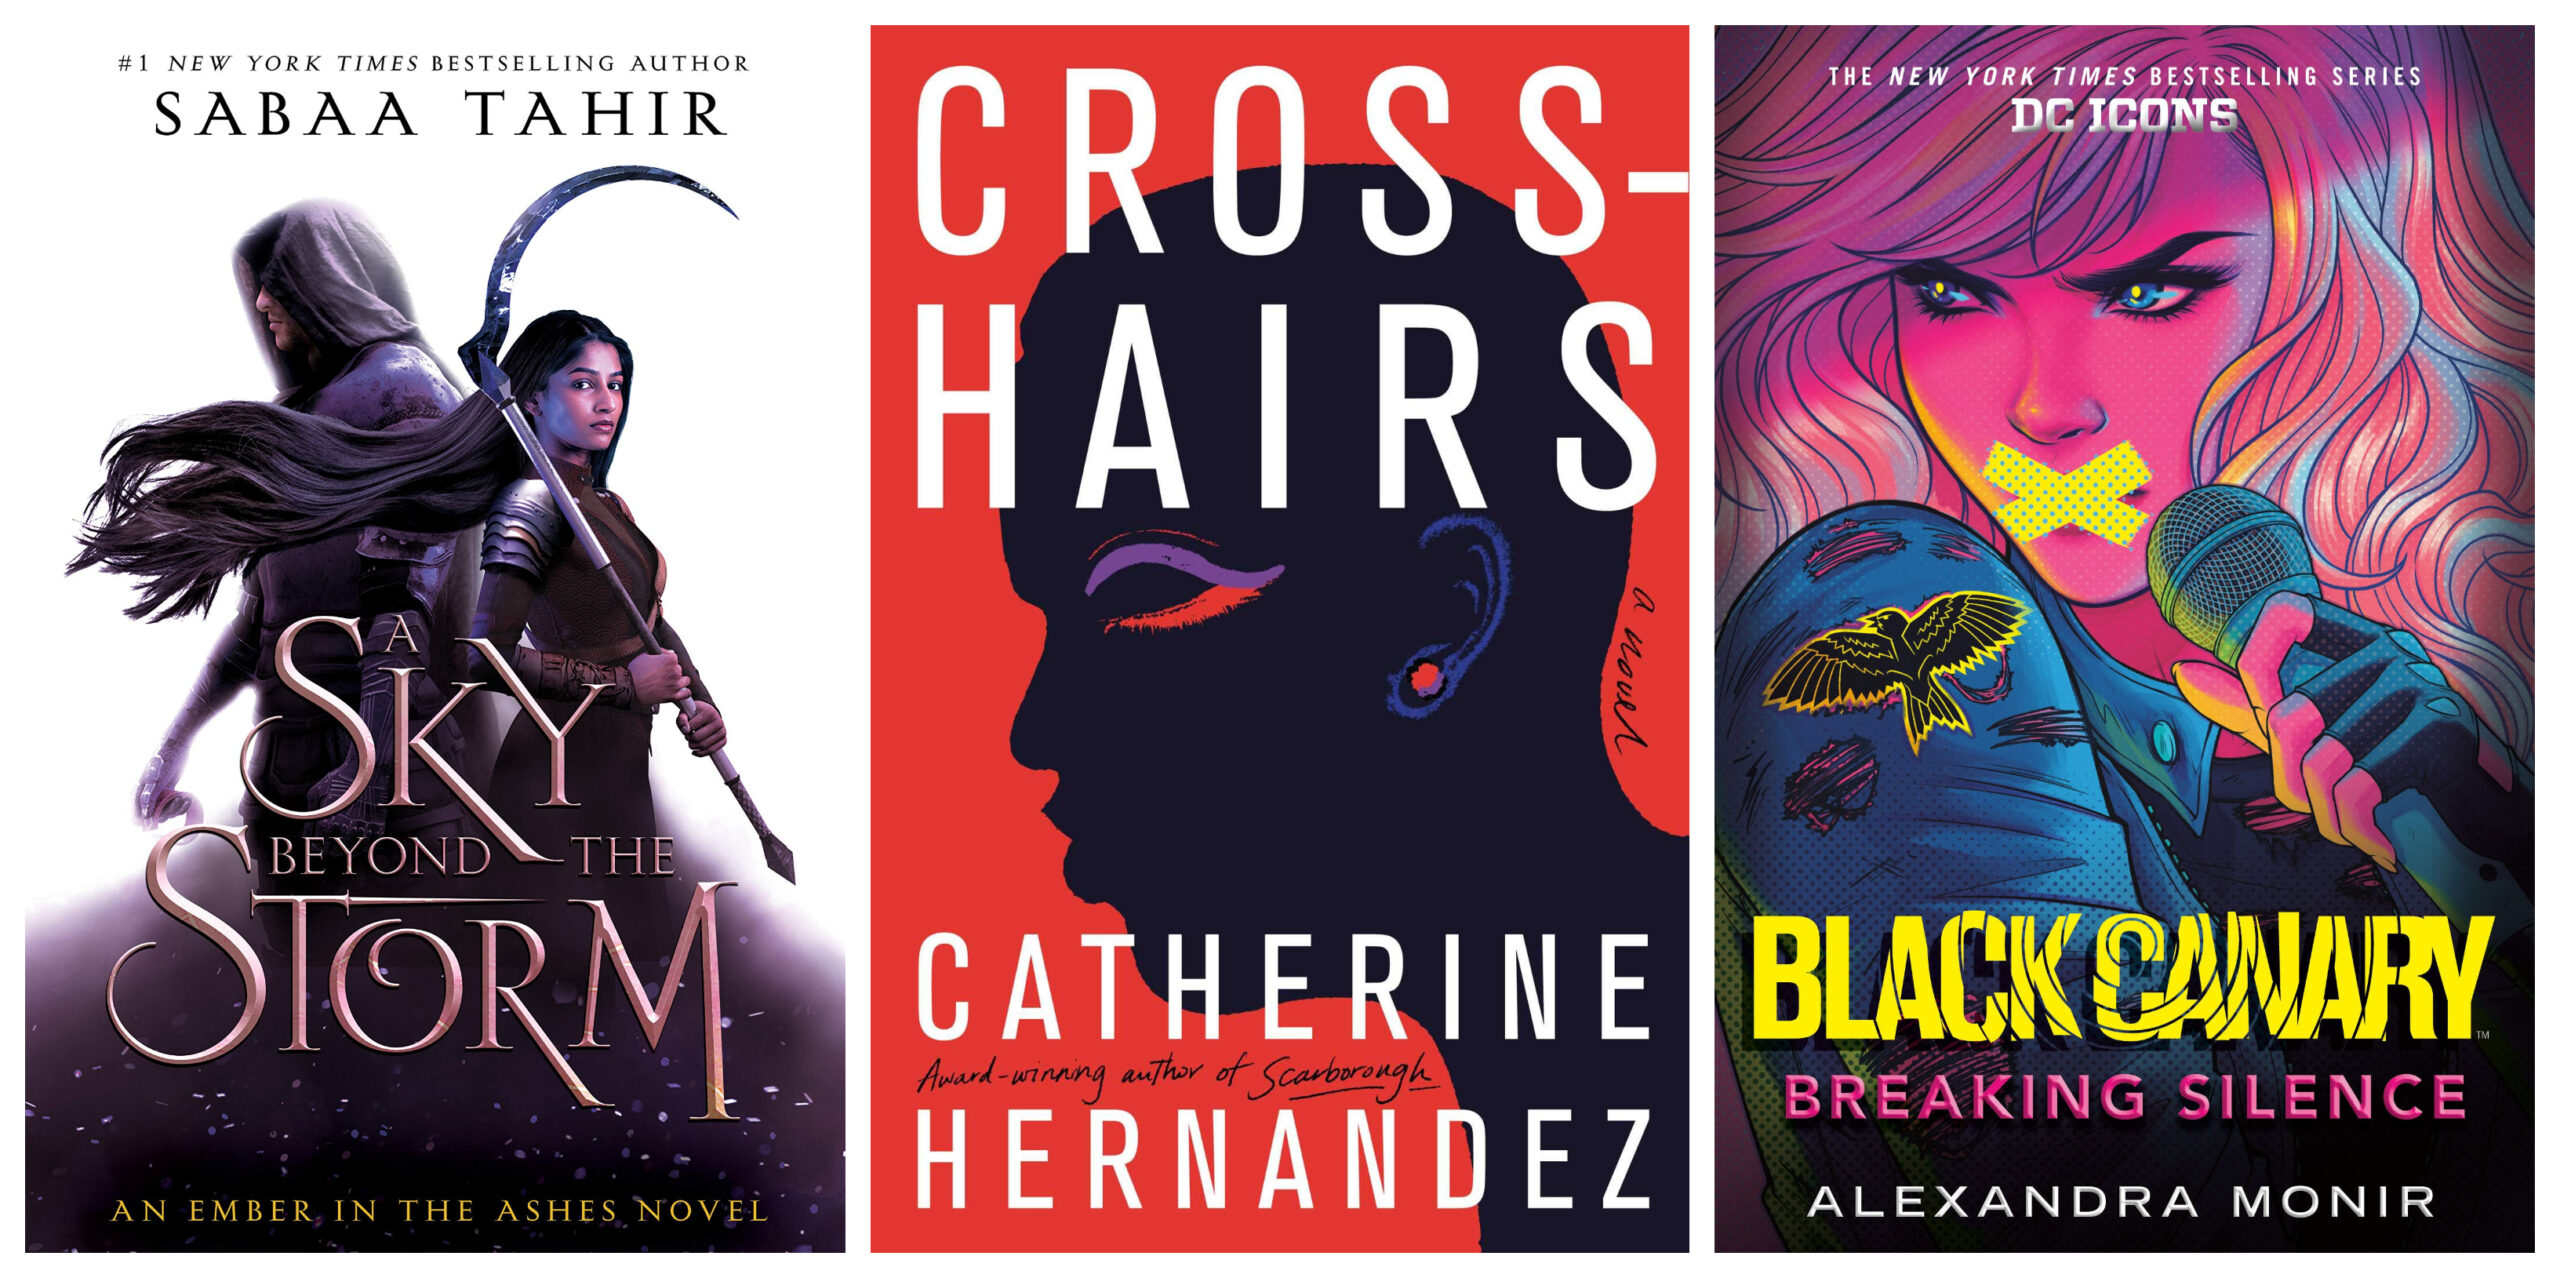 Book covers of A Sky Above The Storm, Crosshairs, and Black Canary: Breaking Silence